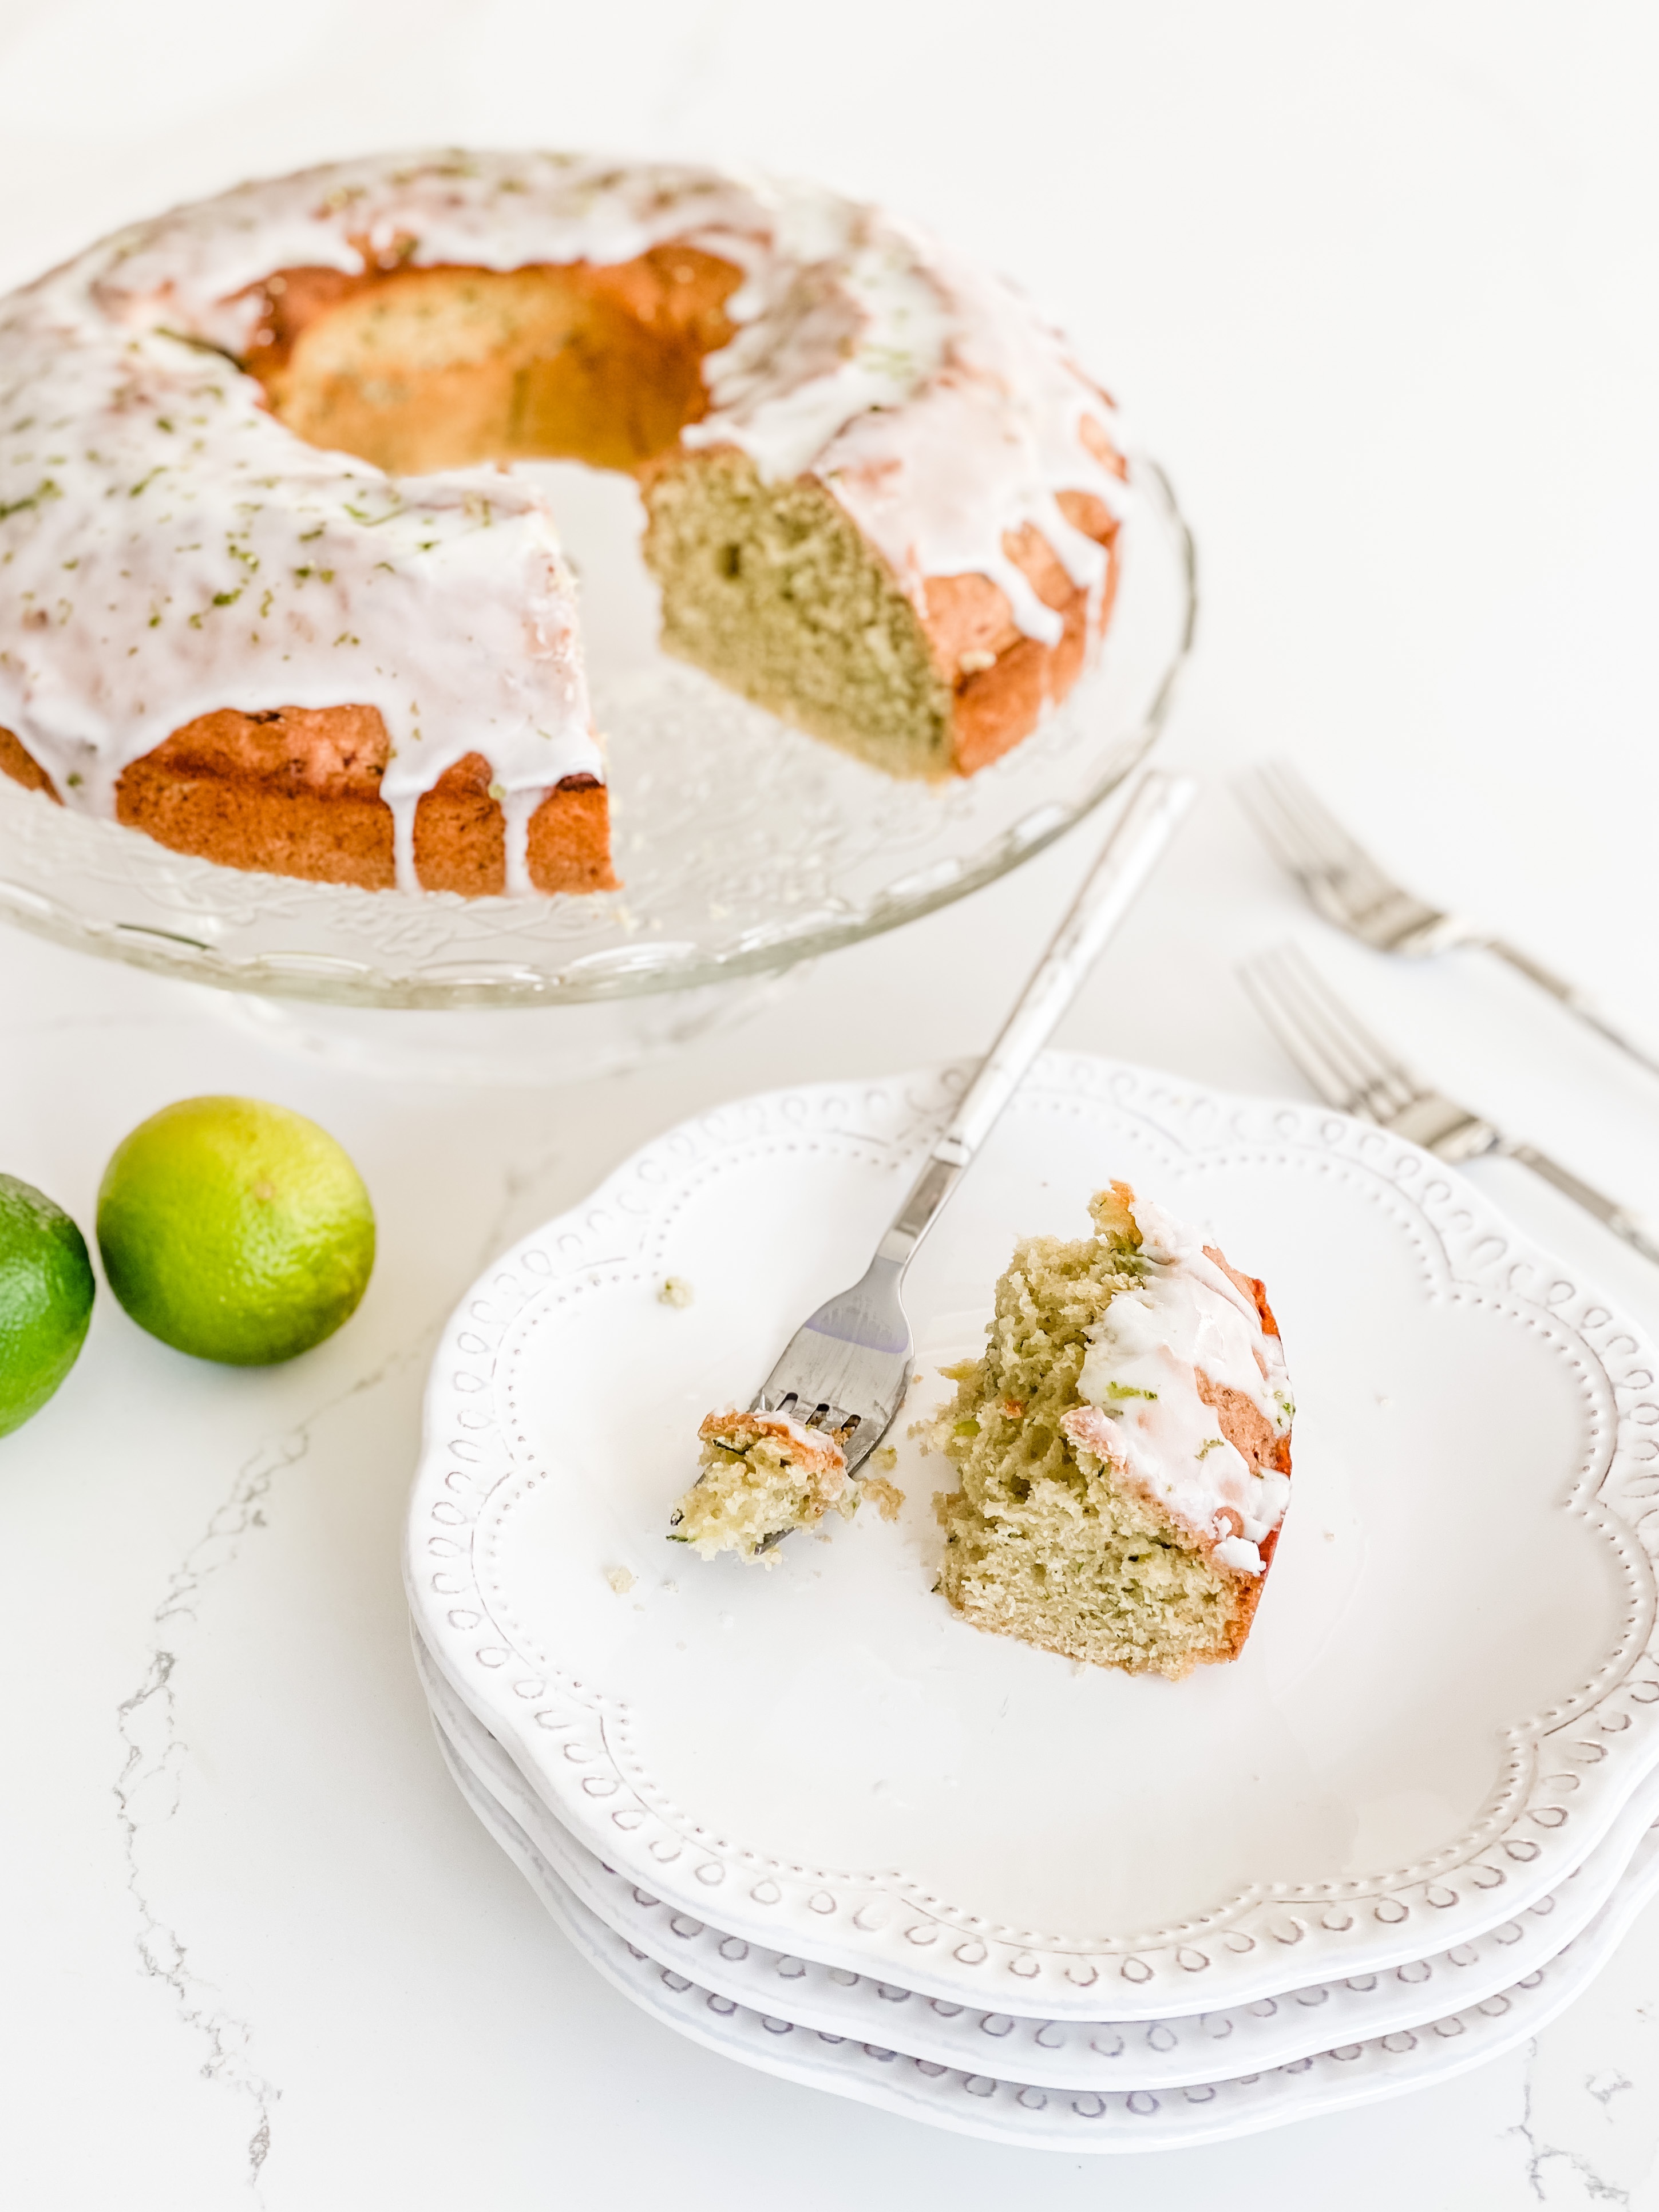 Lime, Avocado, and Courgette Cake for a Healthier Birthday Cake